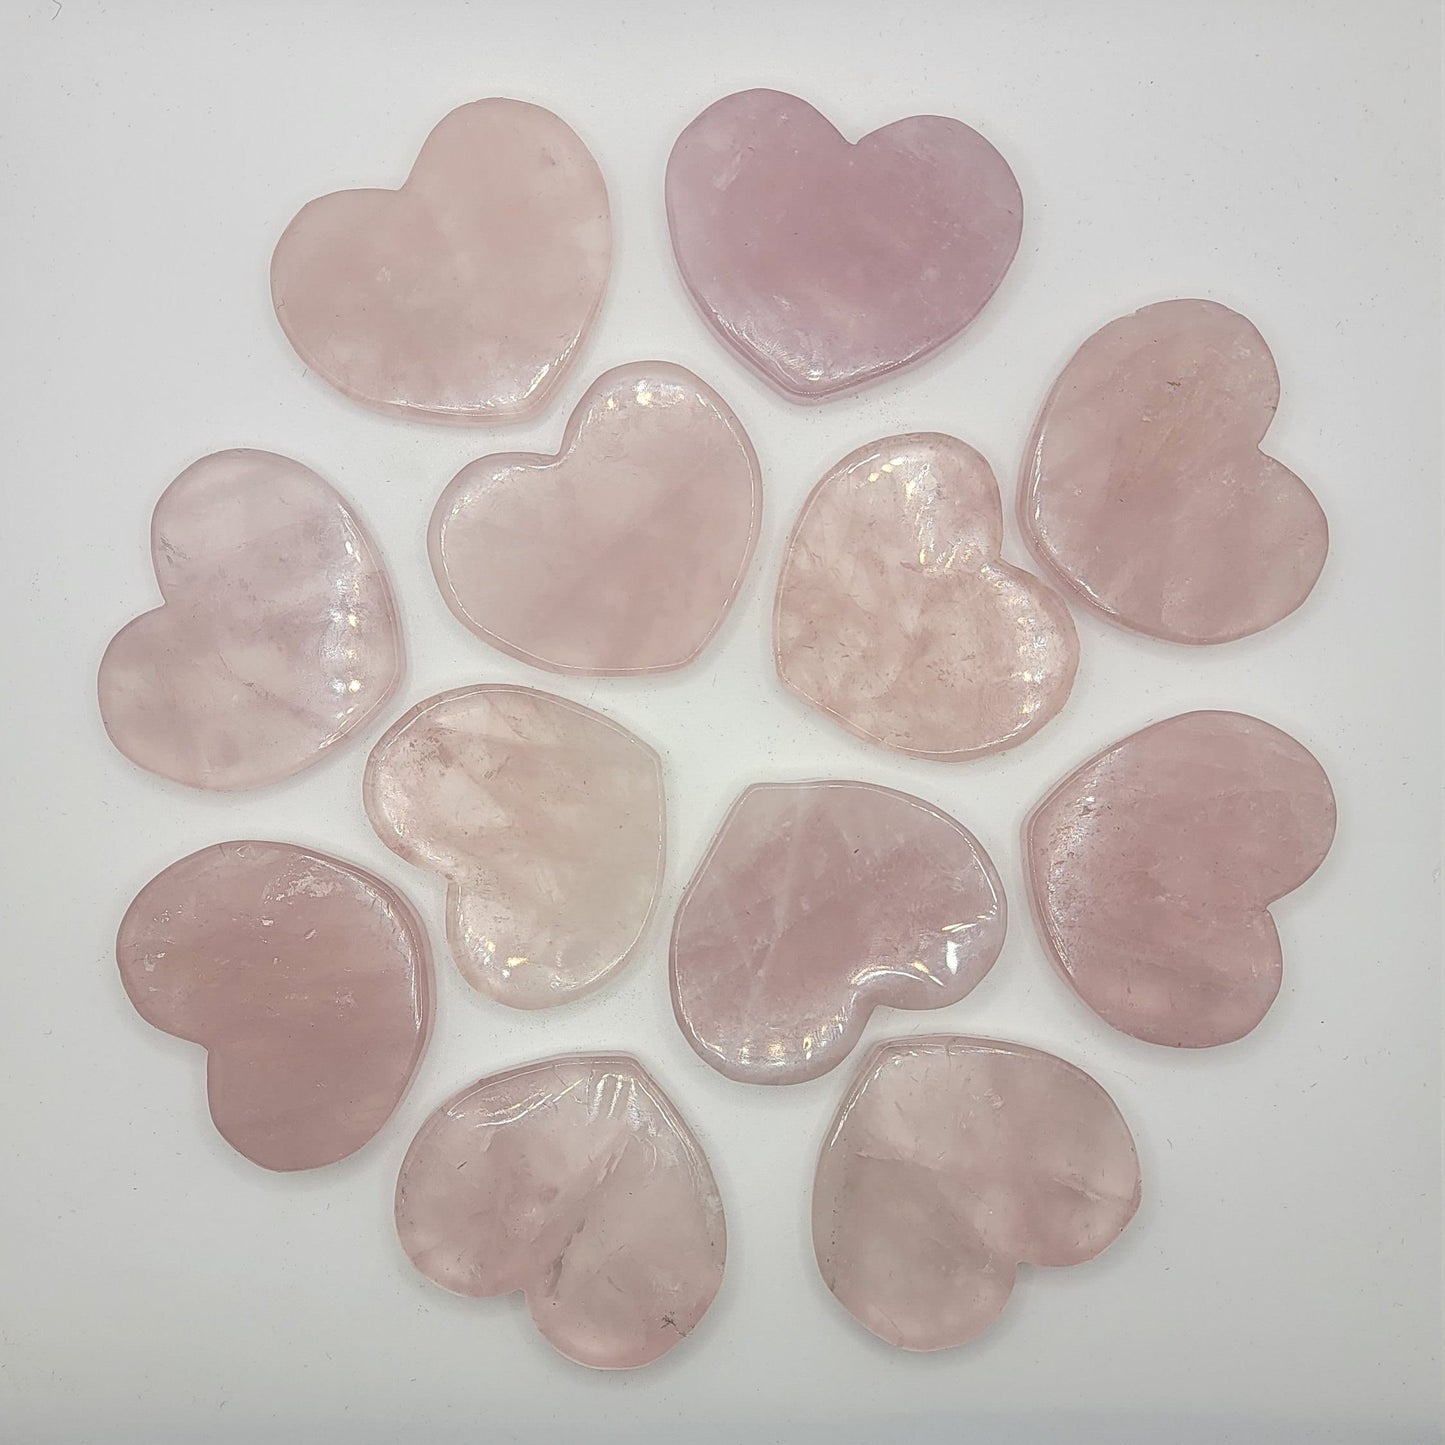 Rose Quartz Heart (Approx. 2" - 2 1/2") Heart Healing Flat Pink Stone Heart for Crafts or Crystal Grid 1435